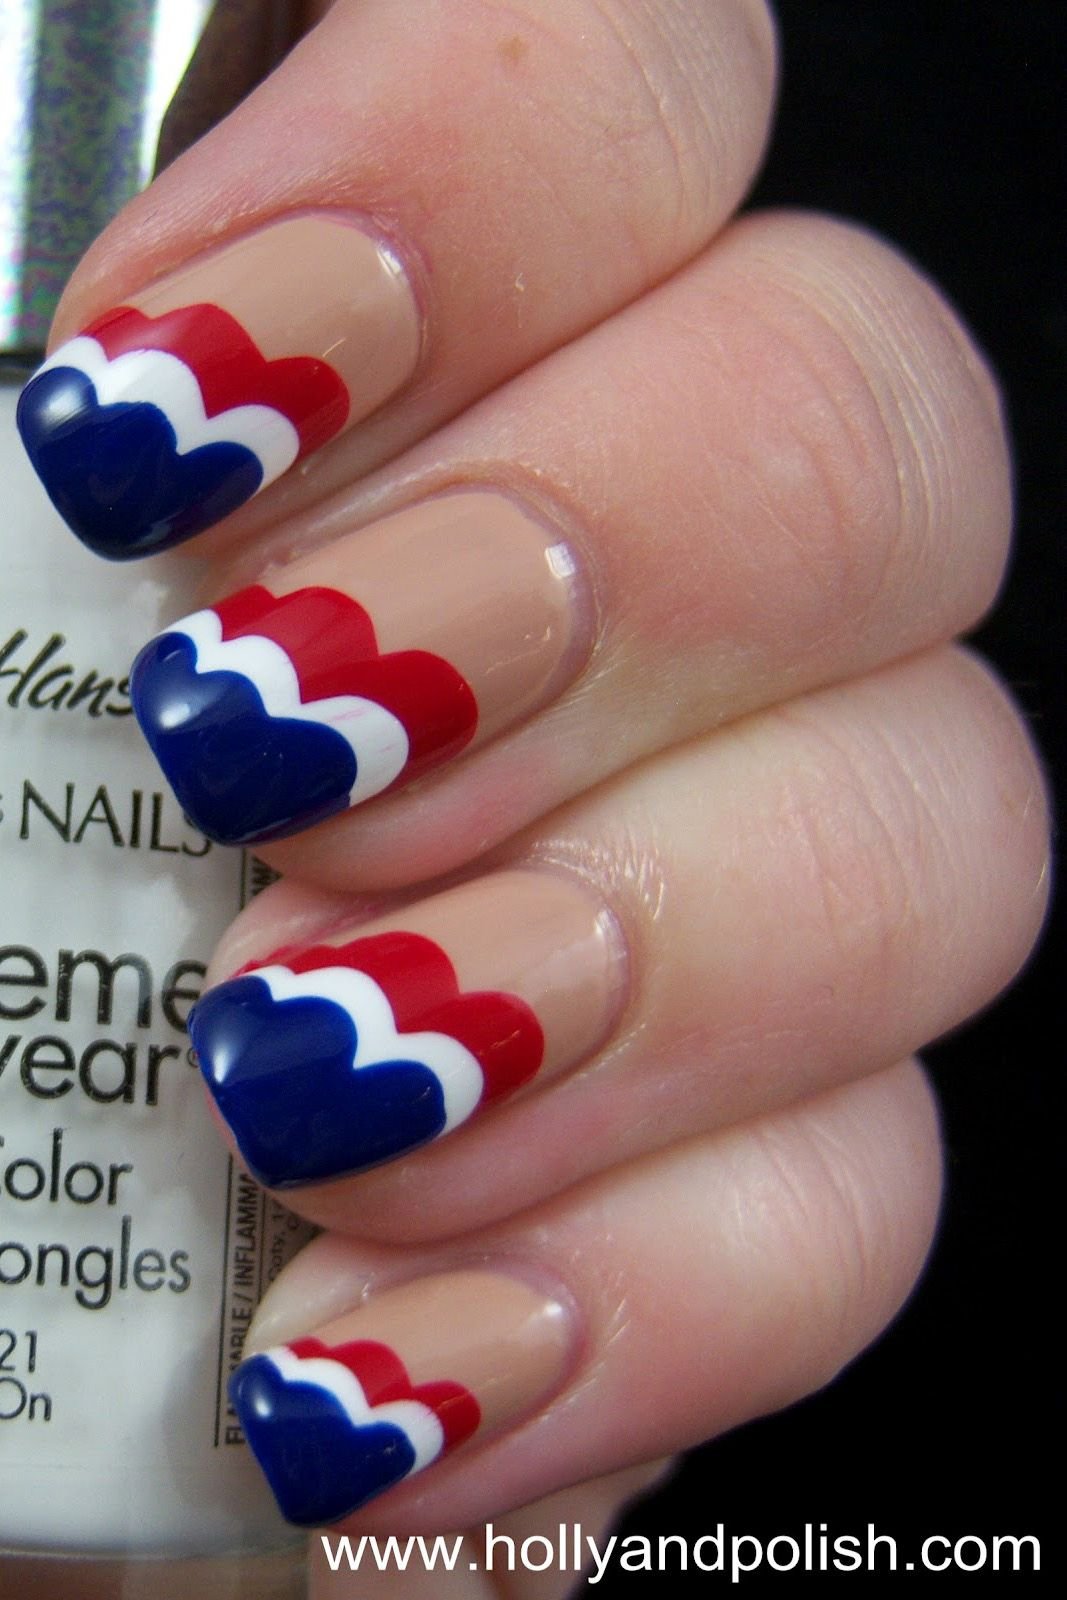 women's red and white nails